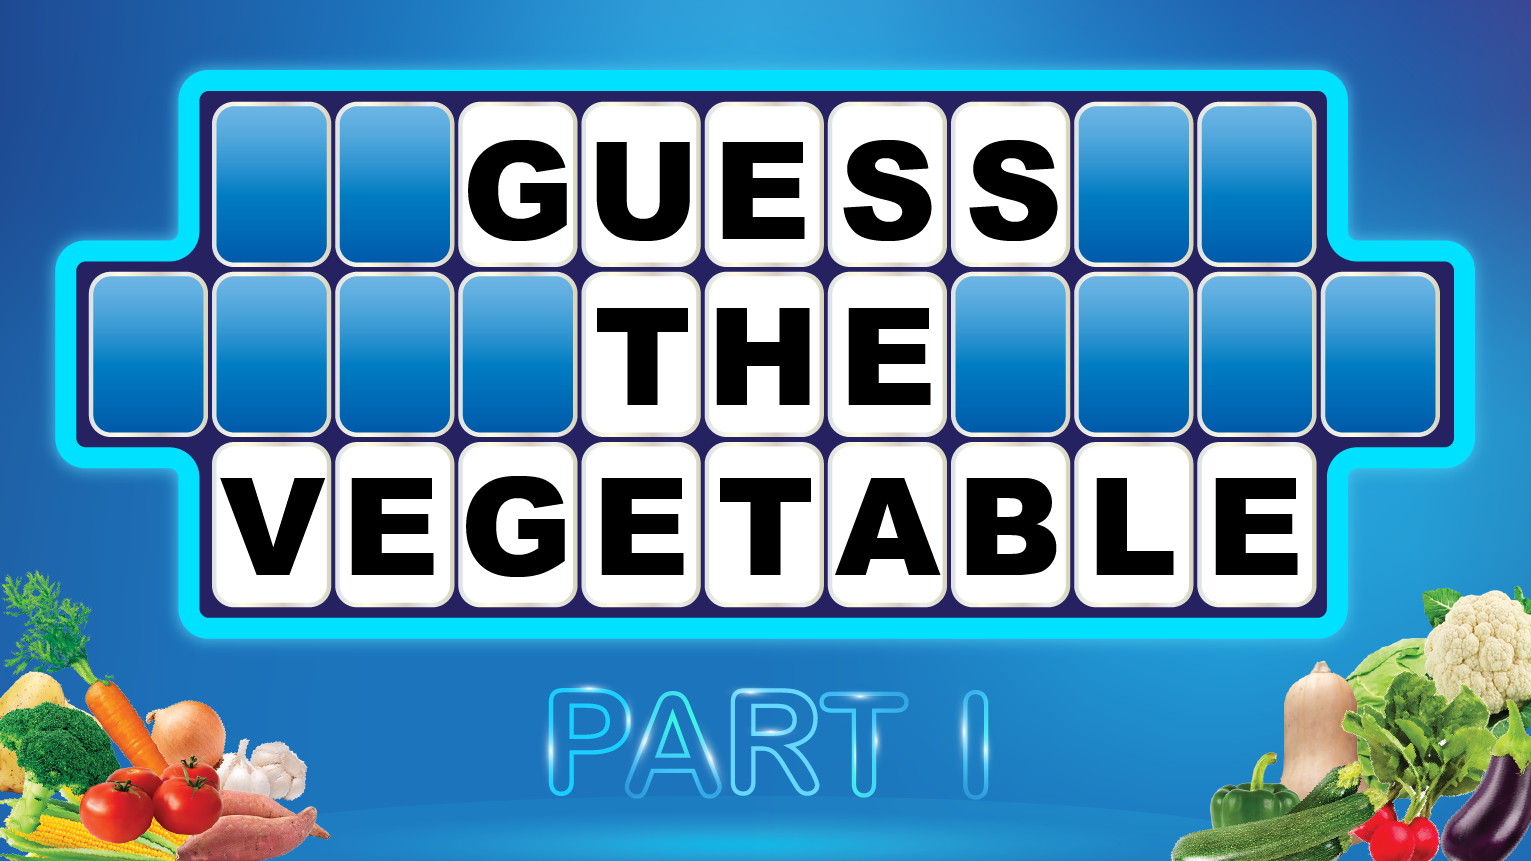 Word Guessing Game - Guess the Vegetable - Part 1